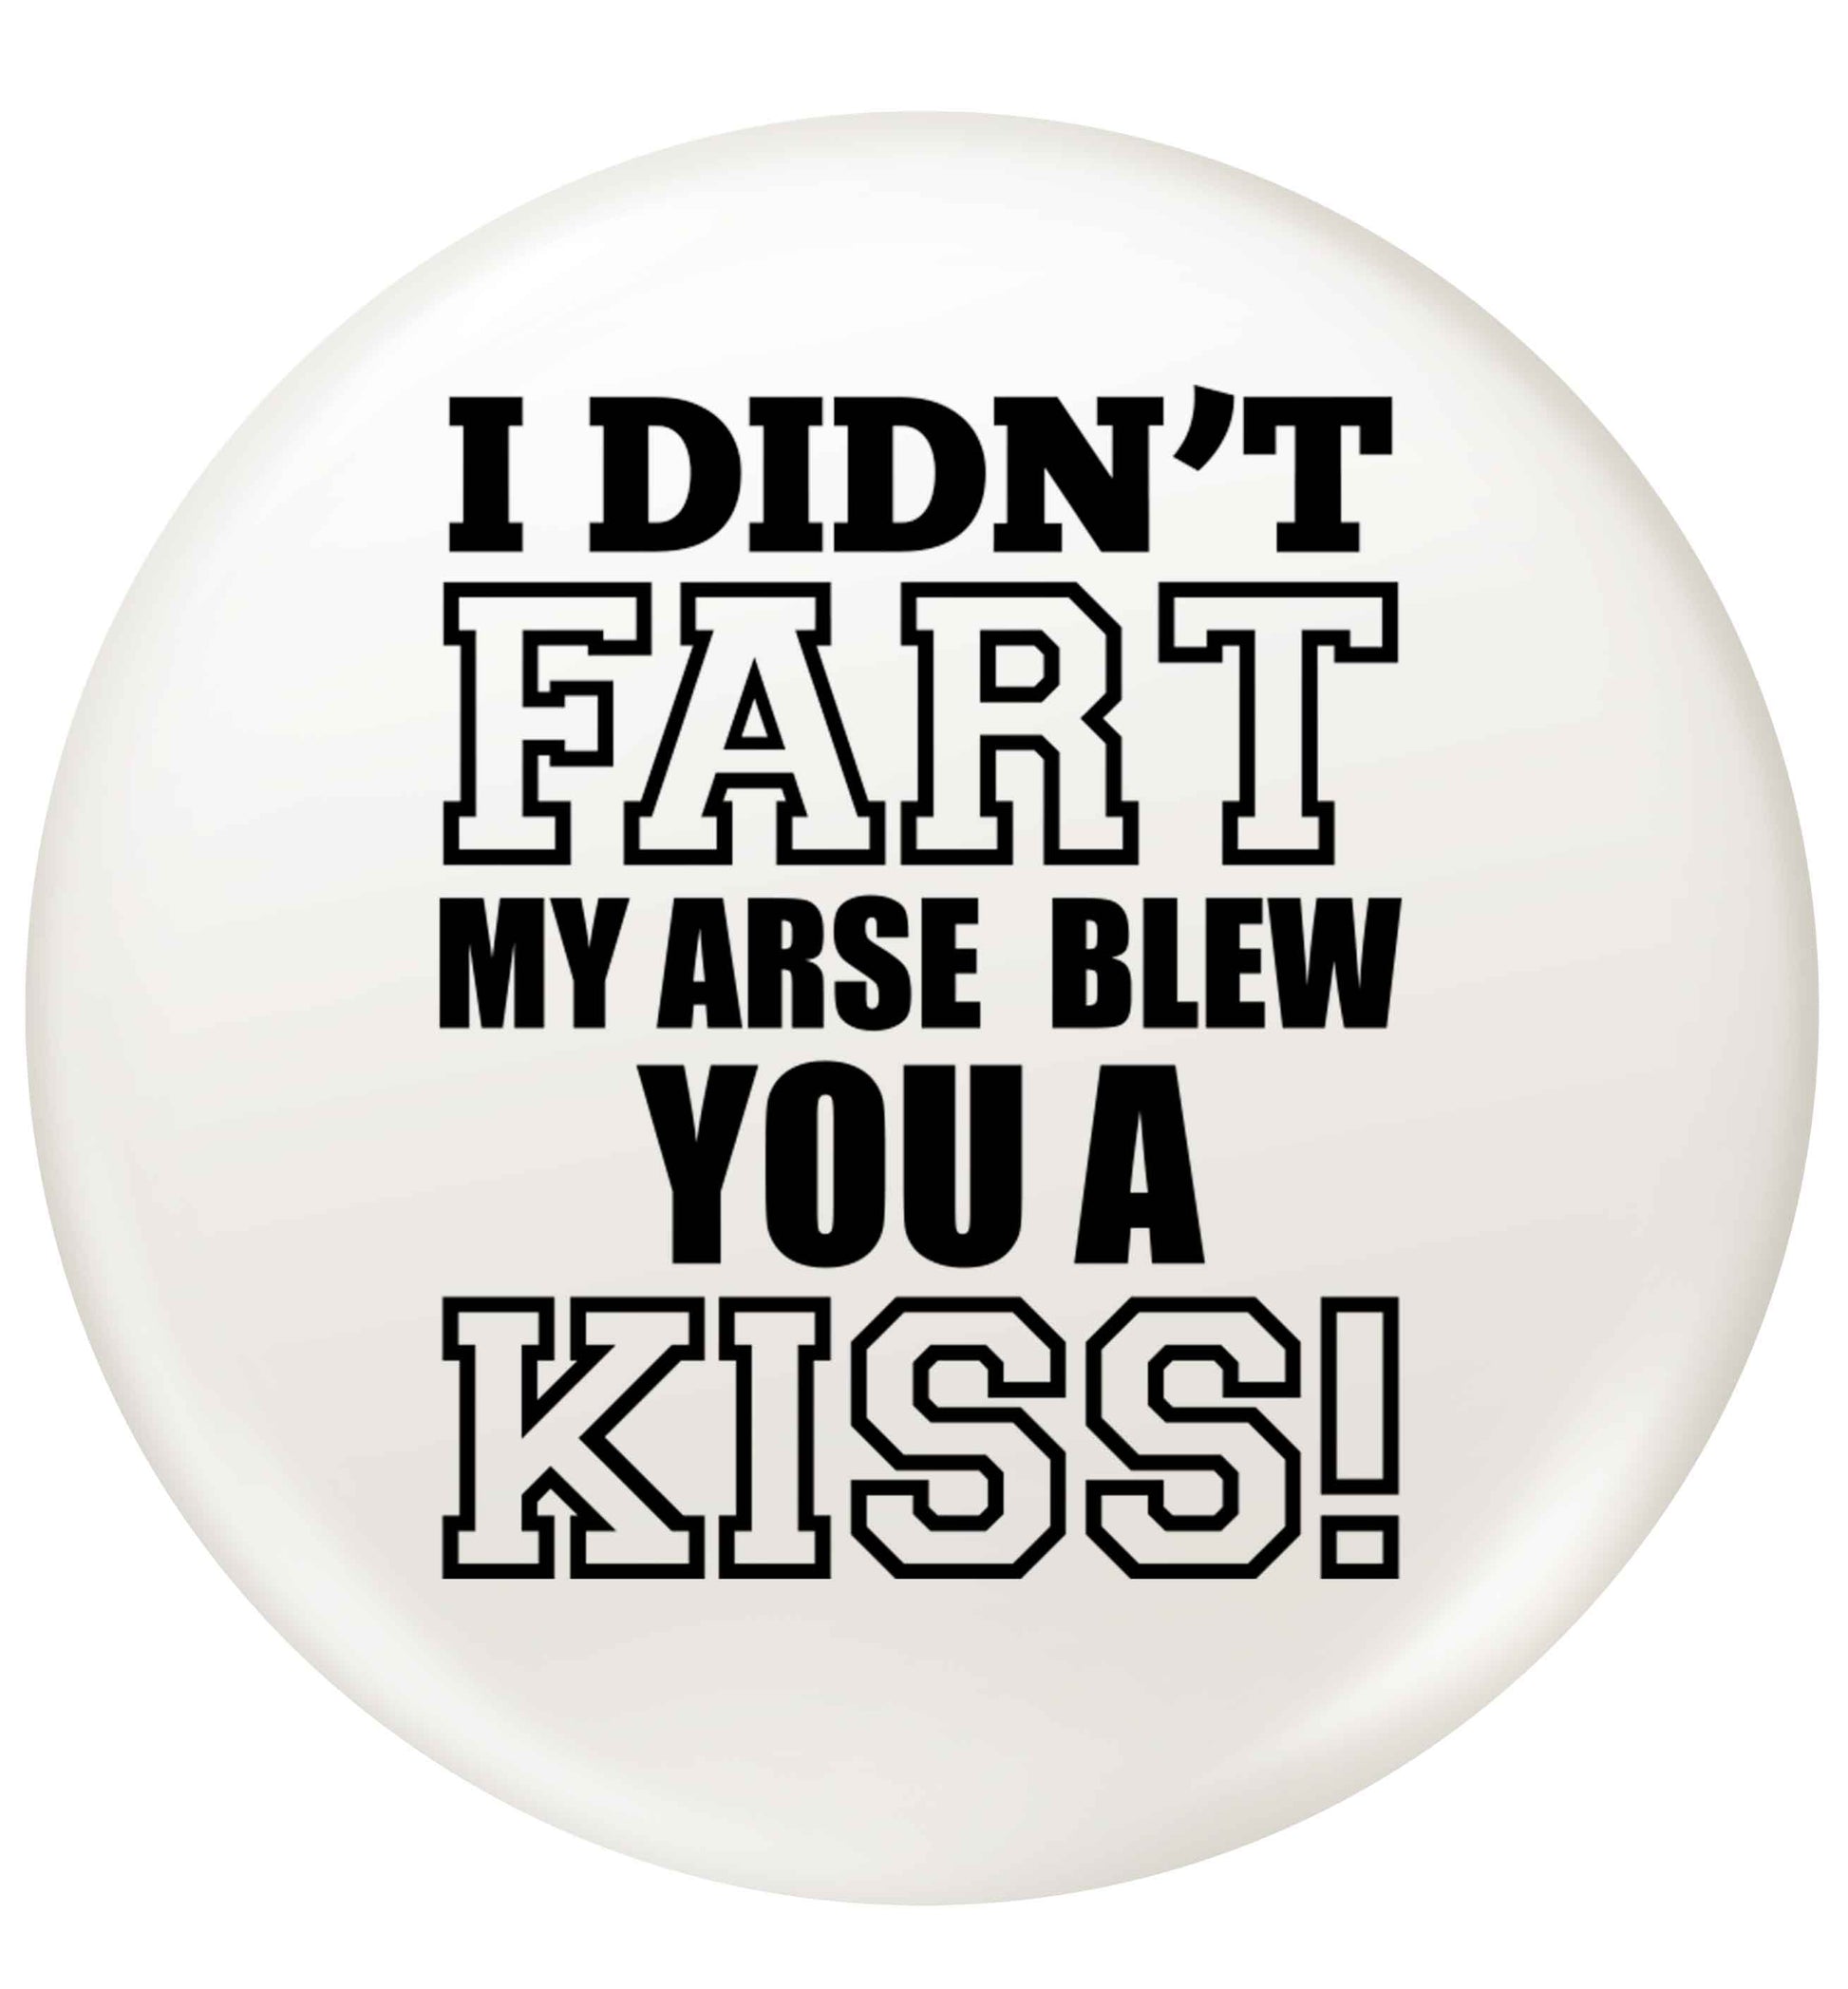 I didn't fart my arse blew you a kiss small 25mm Pin badge